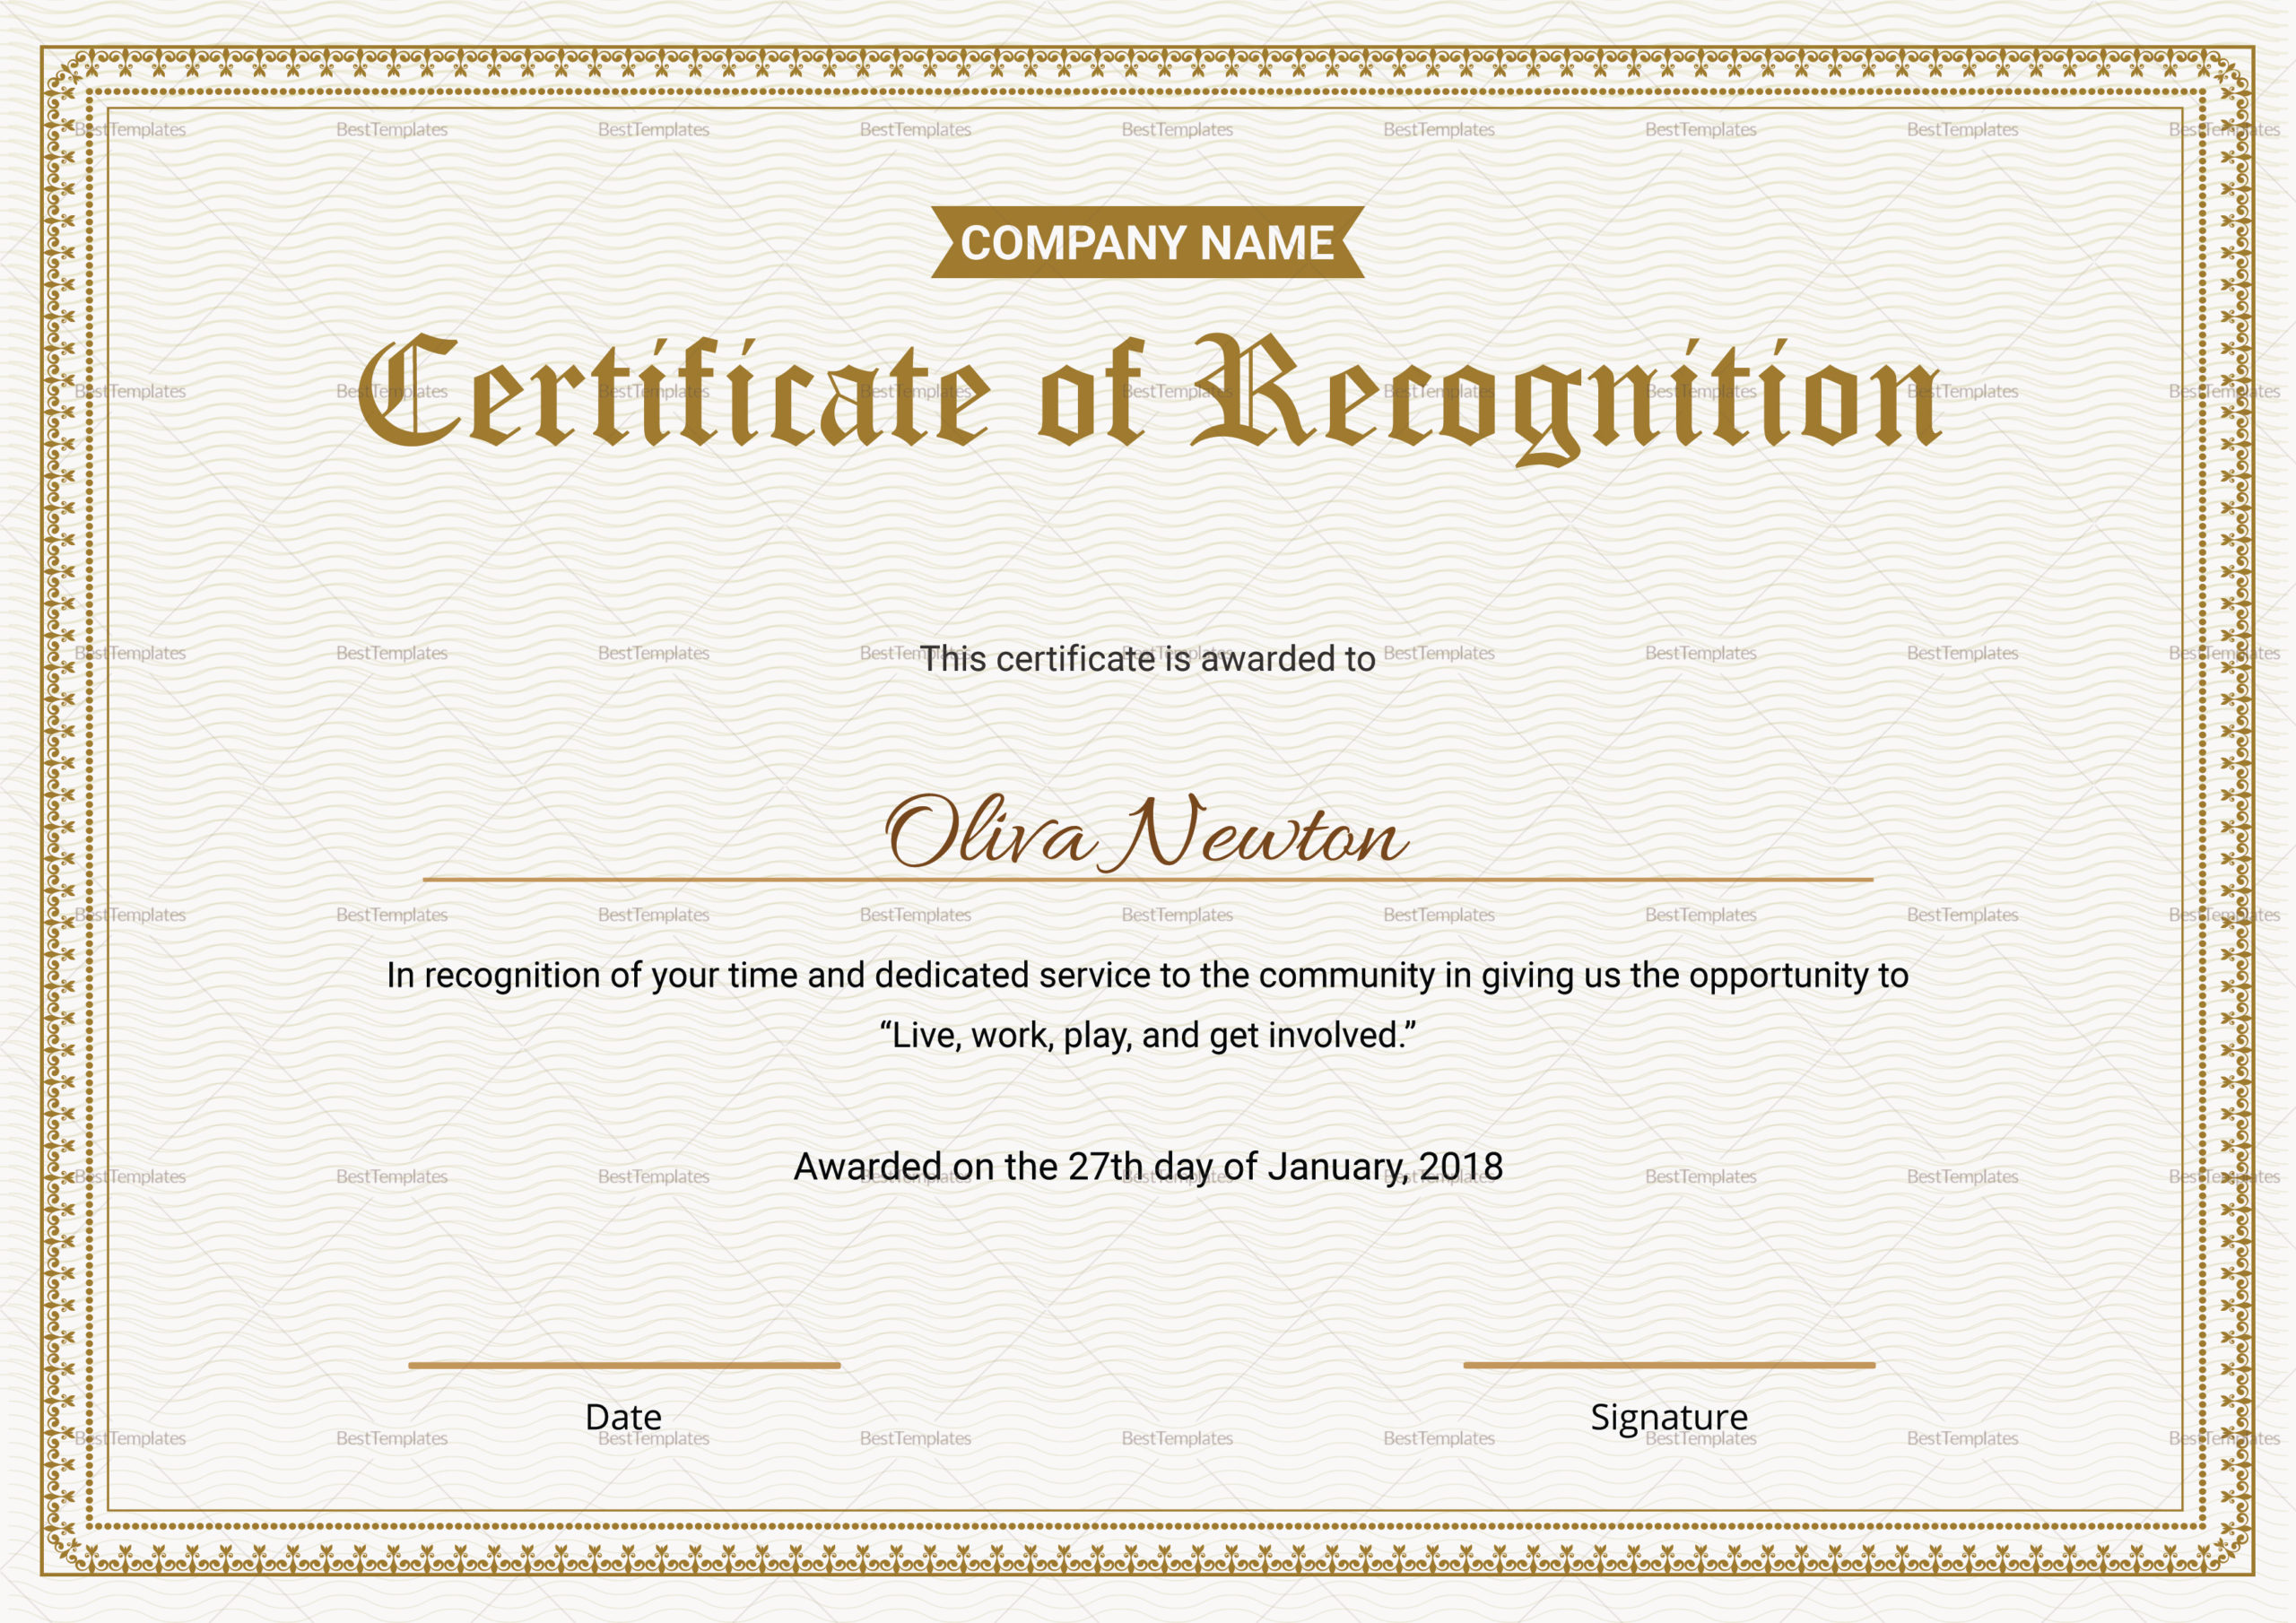 Employee Recognition Certificate Design Template In Psd, Word In Certificate Of Appreciation Template Word